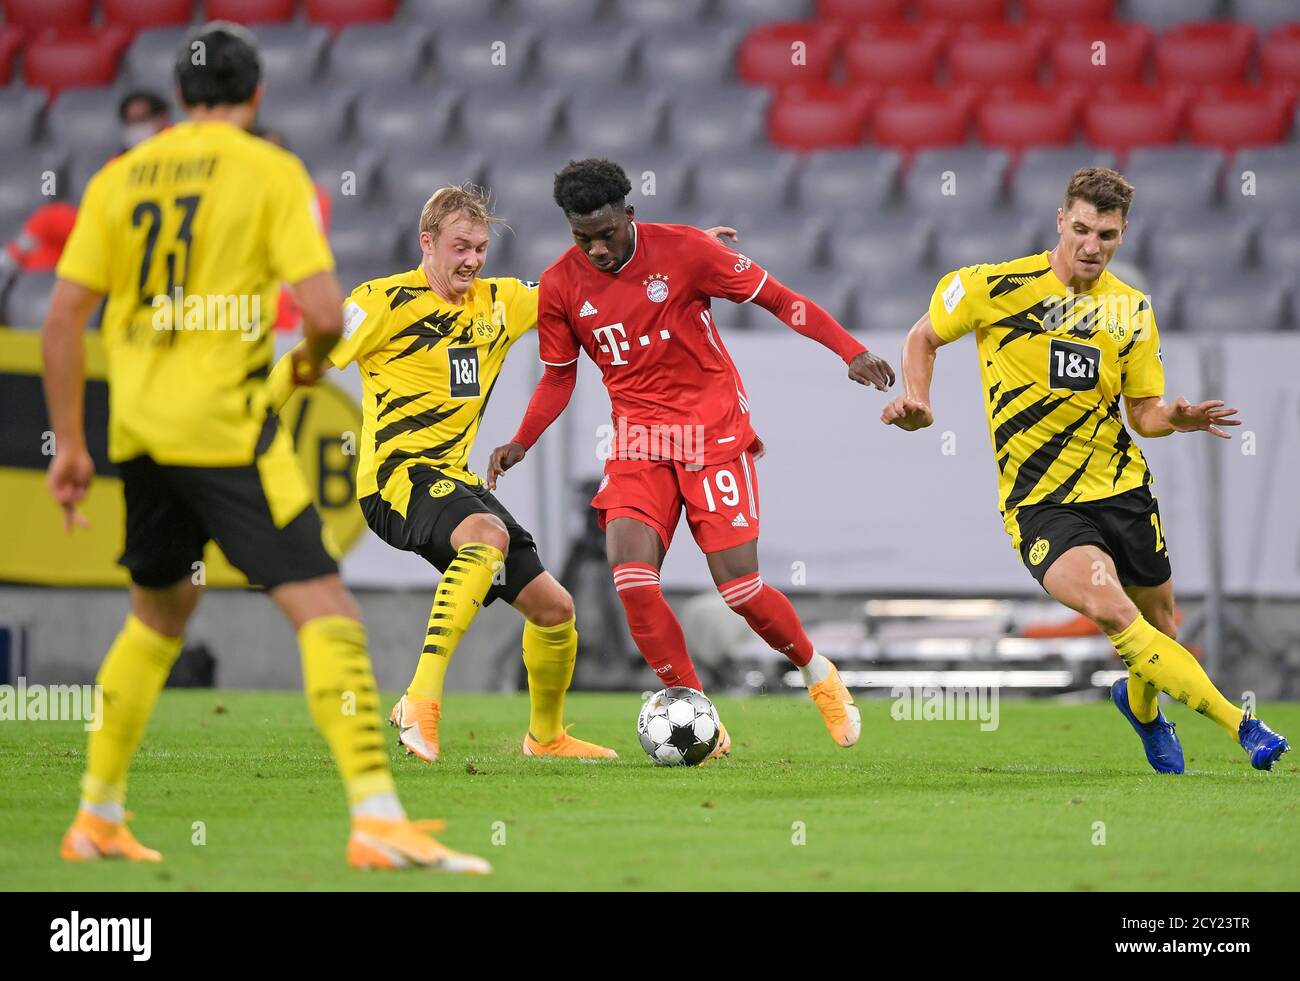 Allianz Arena Munich Germany 30.09.20, Football: German SUPERCUP FINALE 2020/2021, FC Bayern Muenchen (FCB, red) vs Borussia Dortmund (BVB, yellow) 3:2 —from left: Julian Brandt (Borussia Dortmund) gegen Alphonso Davies (Bayern München) und Thomas Meunier (Borussia Dortmund)   Foto: Bernd Feil/M.i.S./Pool/via Kolvenbach   Only for editorial use!  DFL regulations prohibit any use of photographs as image sequences and/or quasi-video.     National and international NewsAgencies OUT. Stock Photo